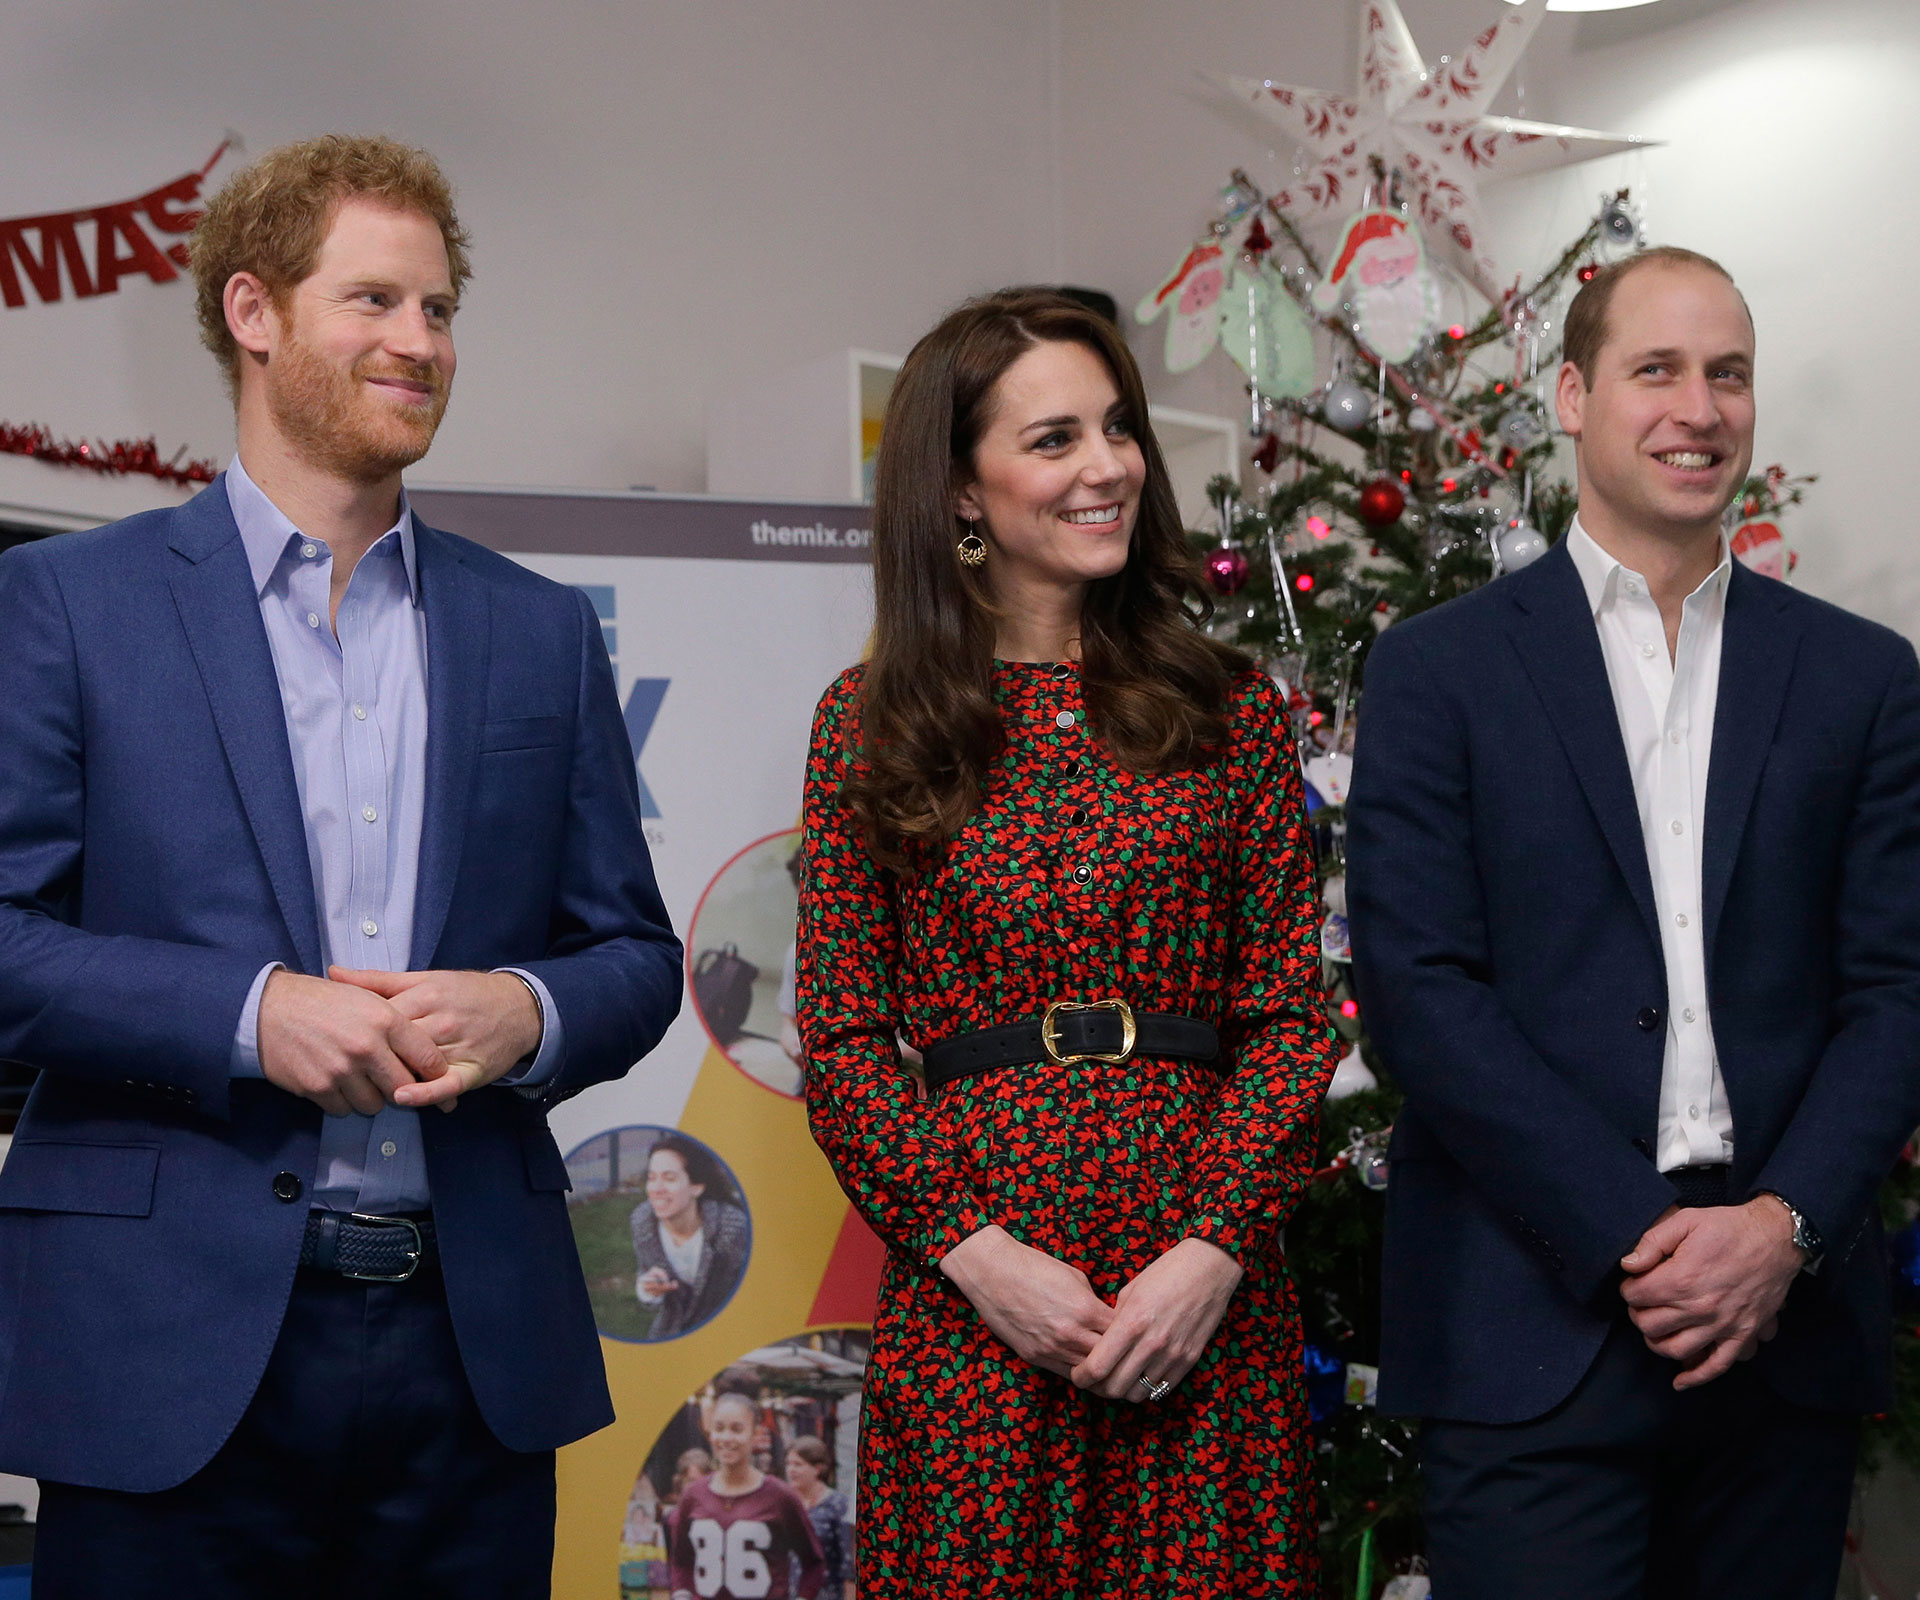 Prince William, the Duchess of Cambridge and Prince Harry attended charity Christmas party together